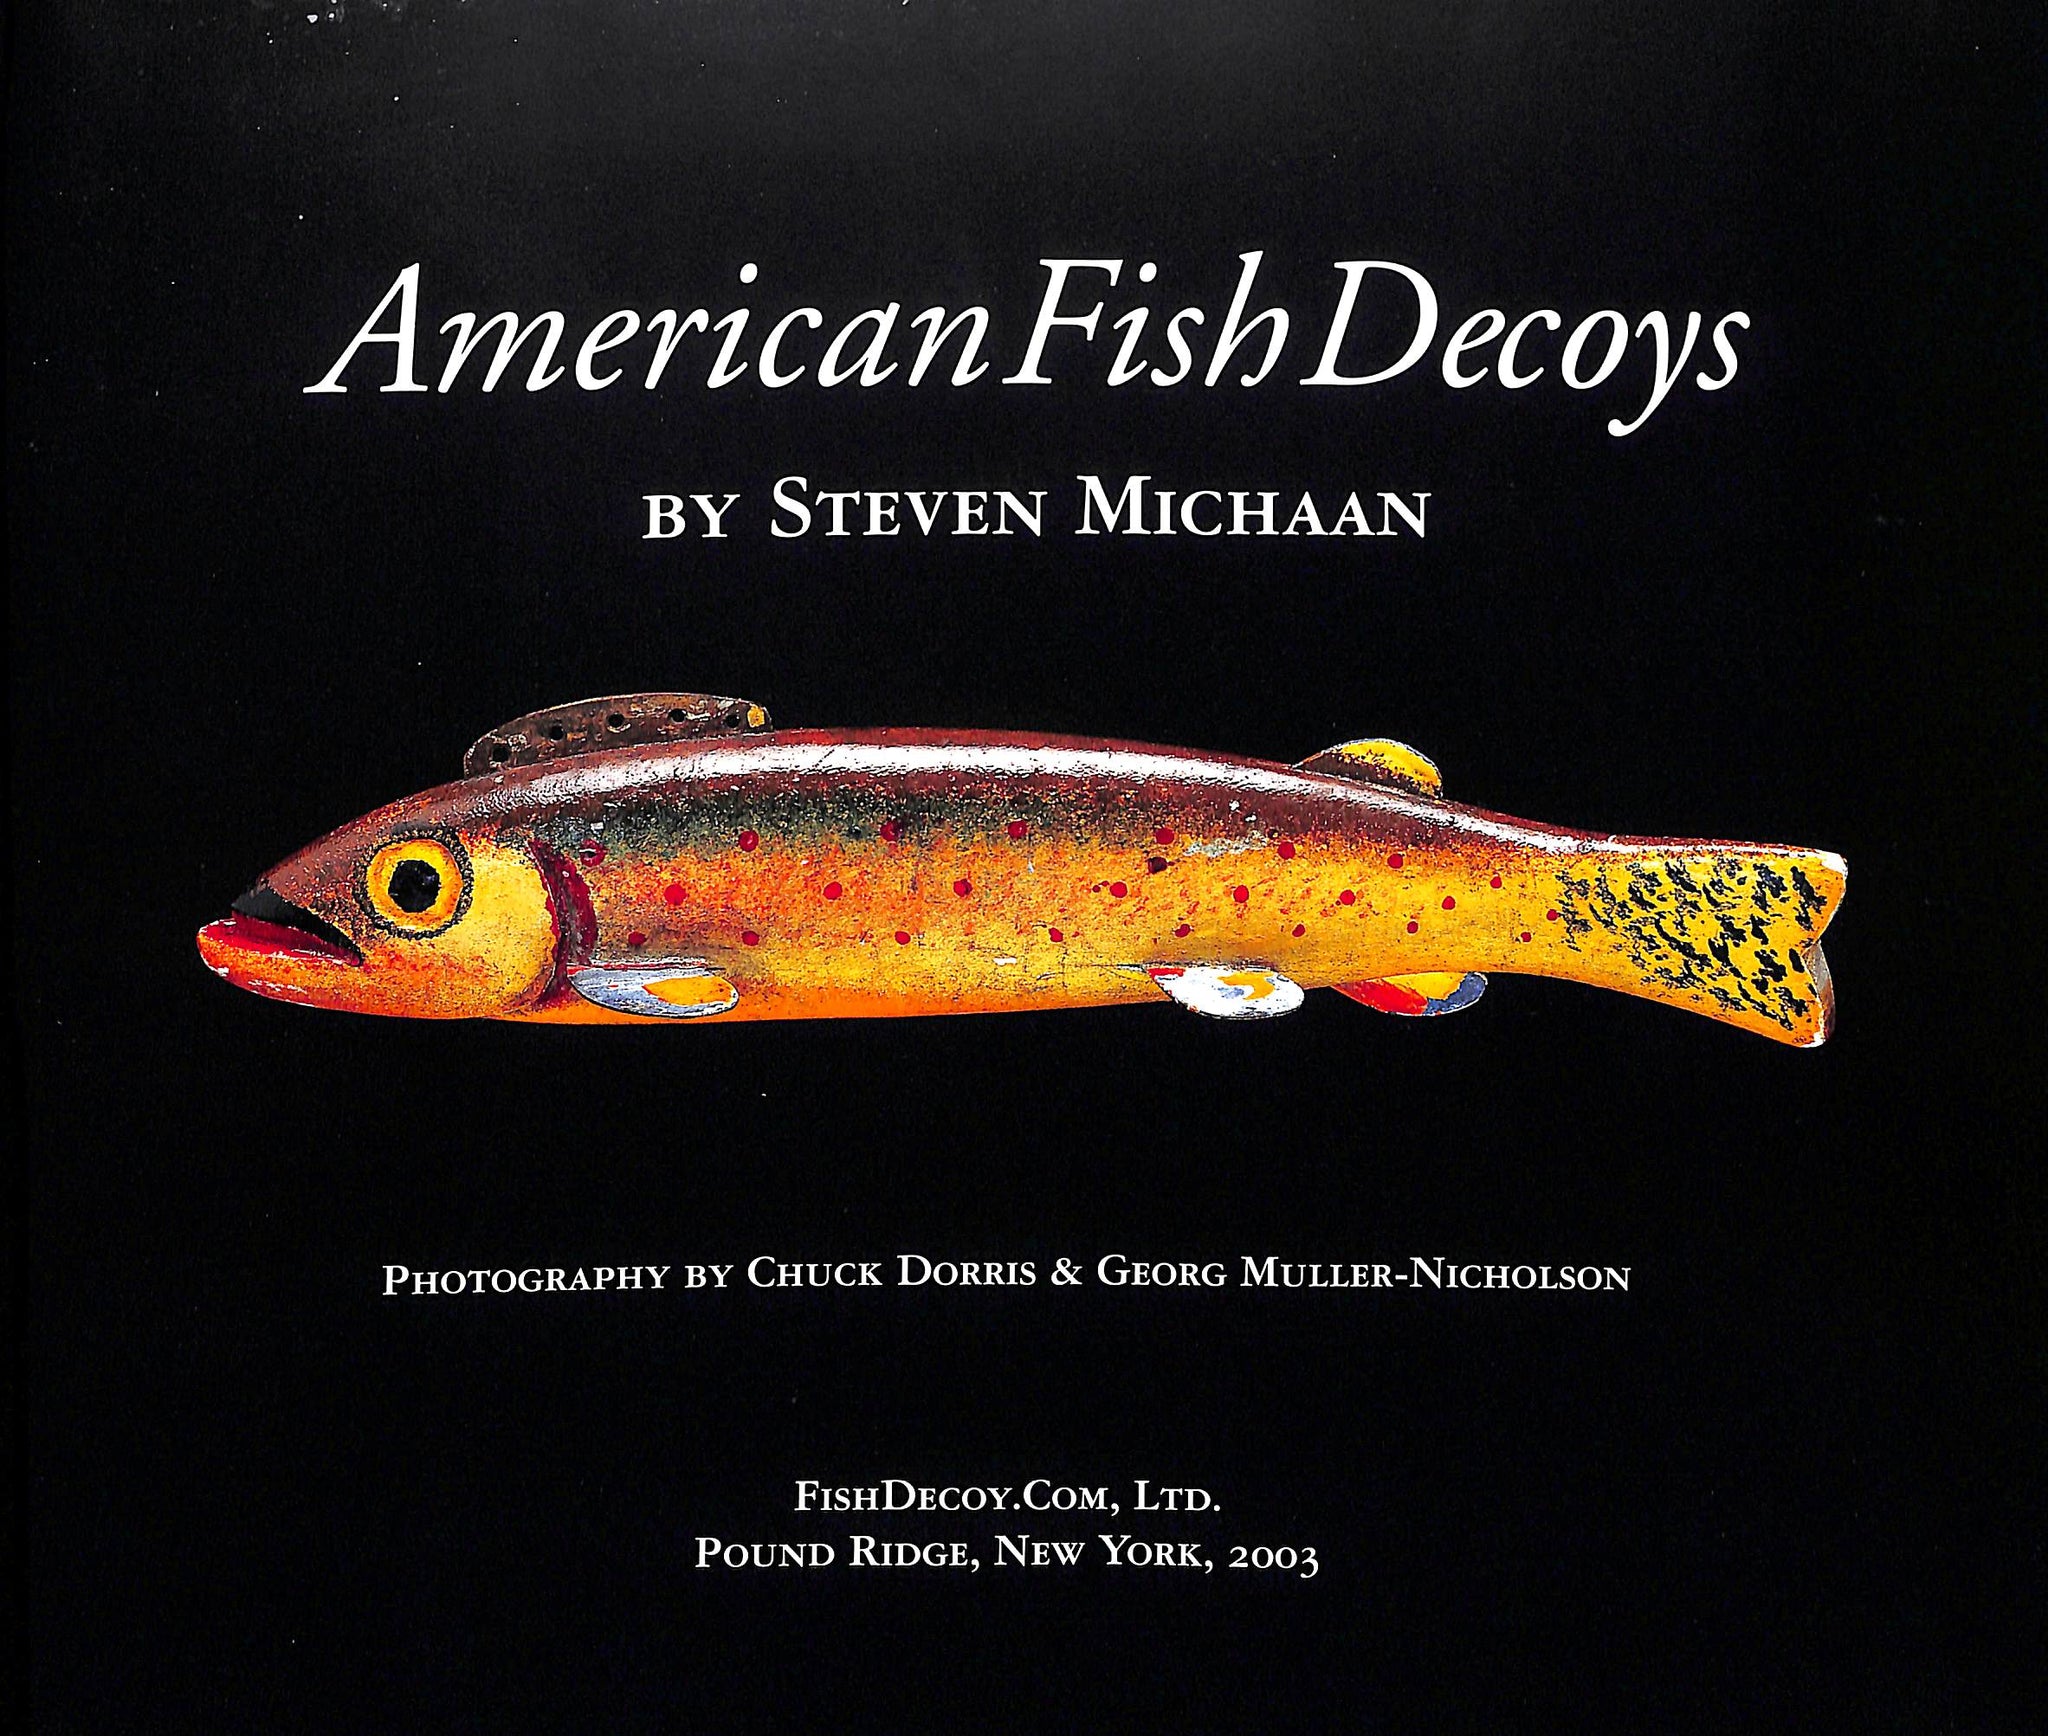 Fish Decoy.com, a brief Historial Overview of Ice Fishing in North America.